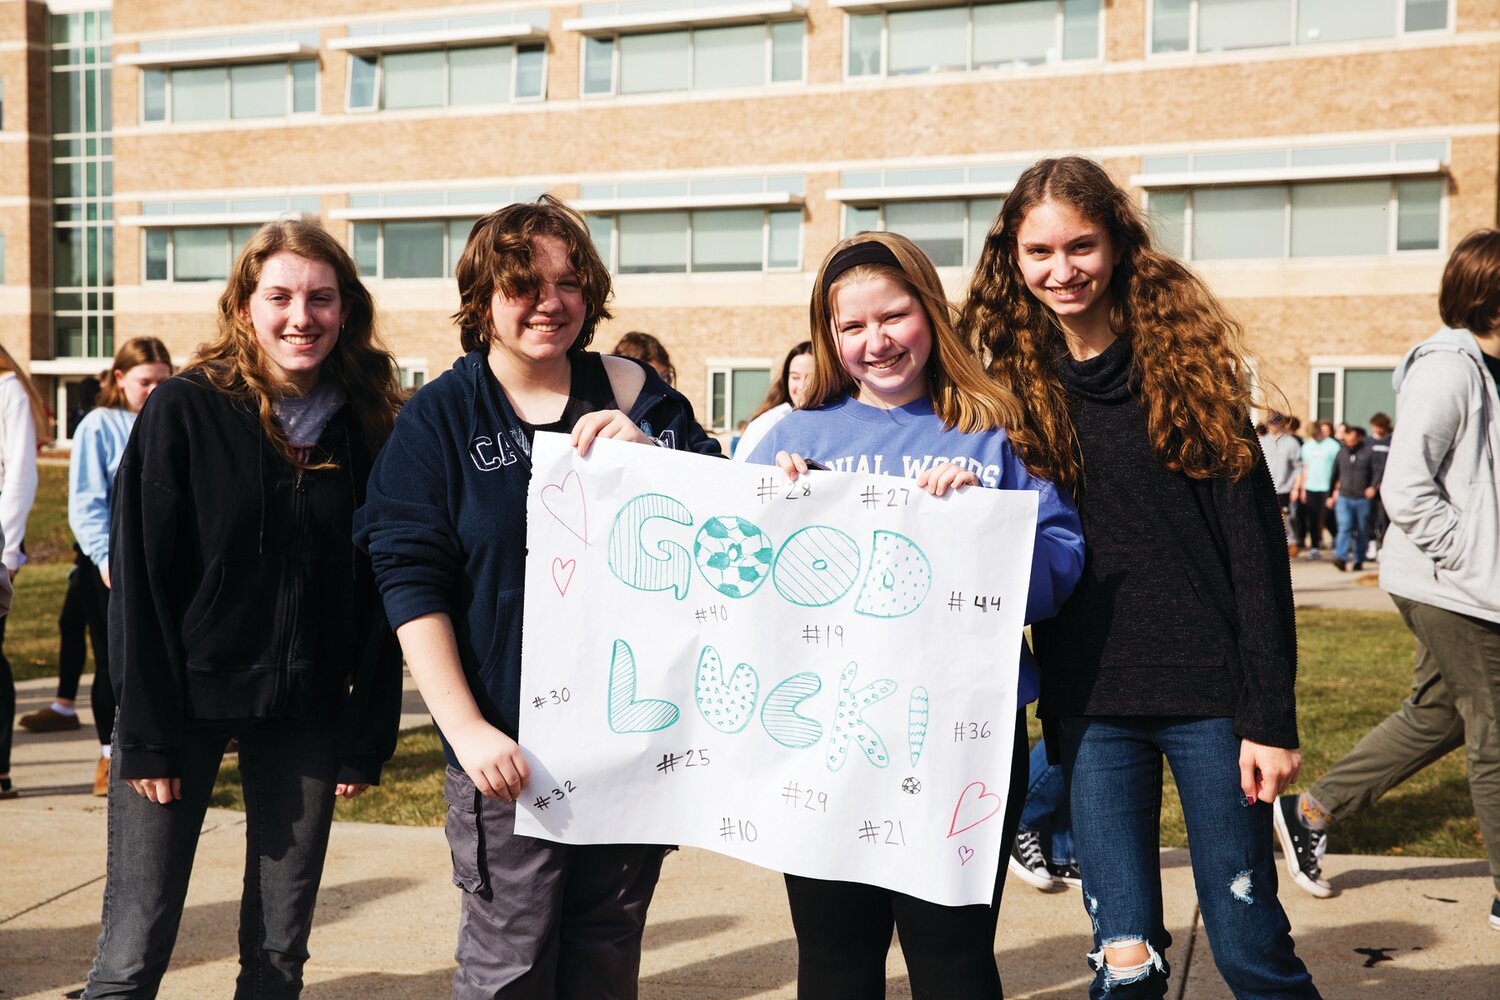 Pennridge High School seniors Maggie Lutz, Silas Nathan, Laney Minko and Emma Allen cheer on the Rams at the sendoff for the team ahead of the PIAA championship game Friday.